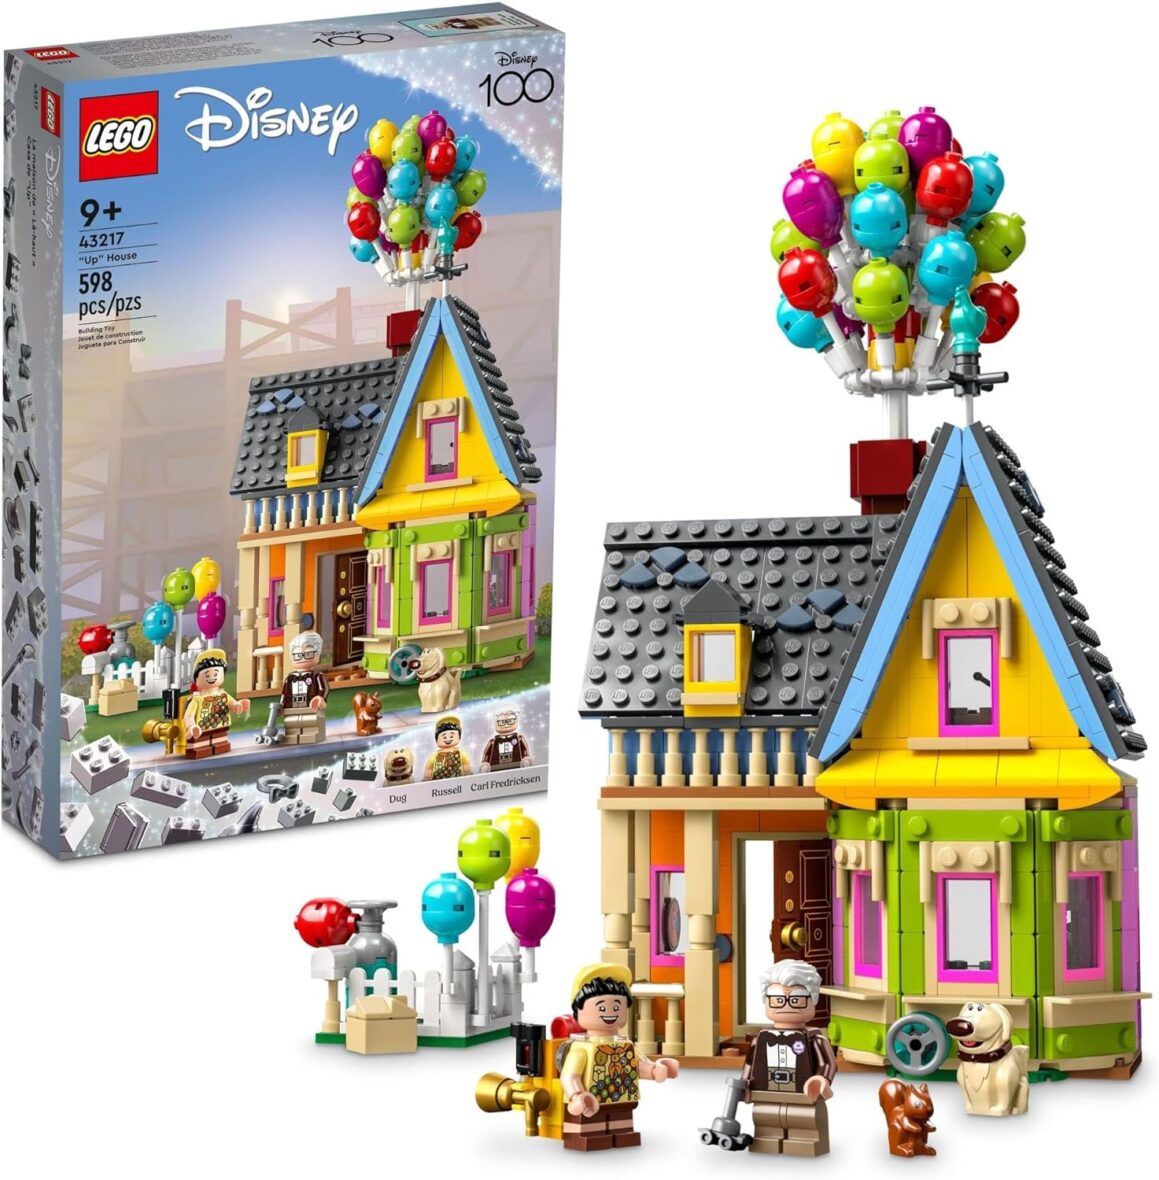 LEGO Disney and Pixar ‘Up’ House 43217 for Disney 100 Celebration, Disney Toy Set for Kids and Movie Fans Ages 9 and Up